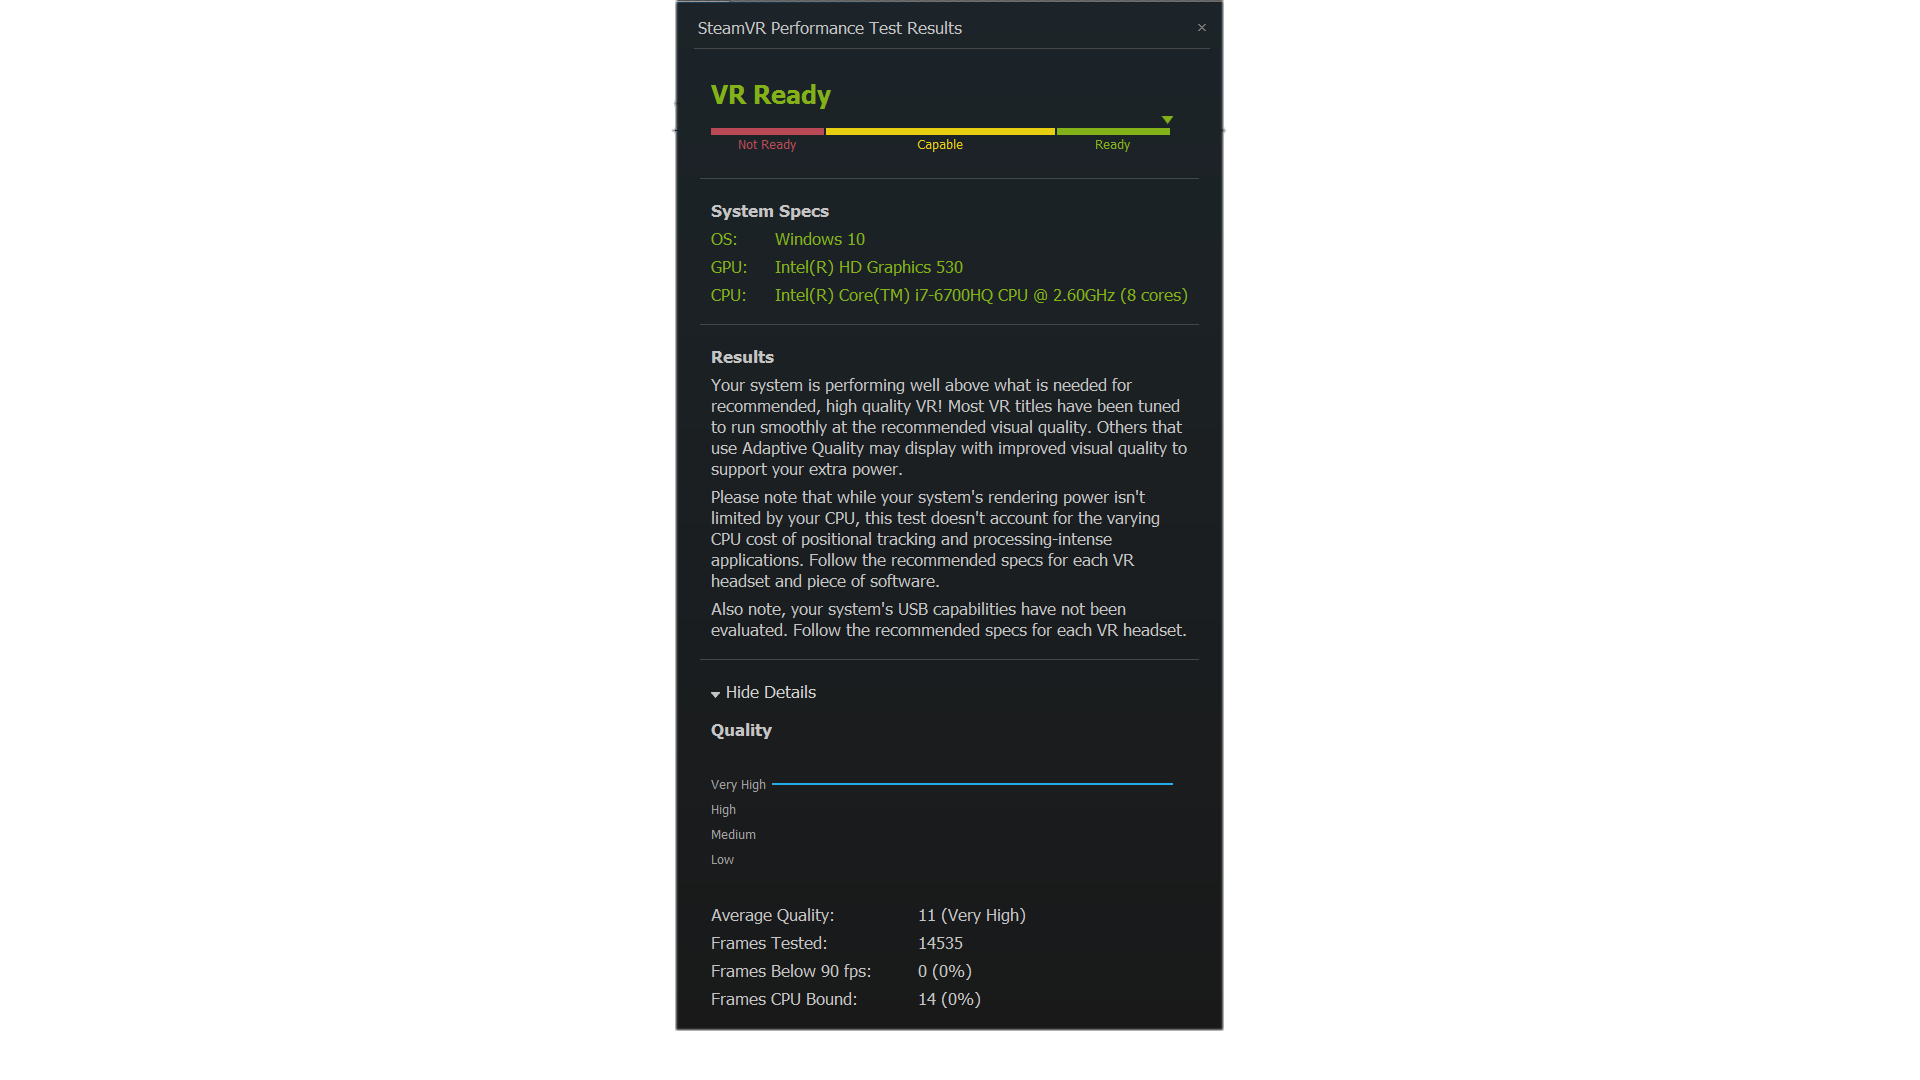 postkontor nødsituation Vil ikke Post your SteamVR Performance Test results here - Page 215 - PC Gaming -  Linus Tech Tips